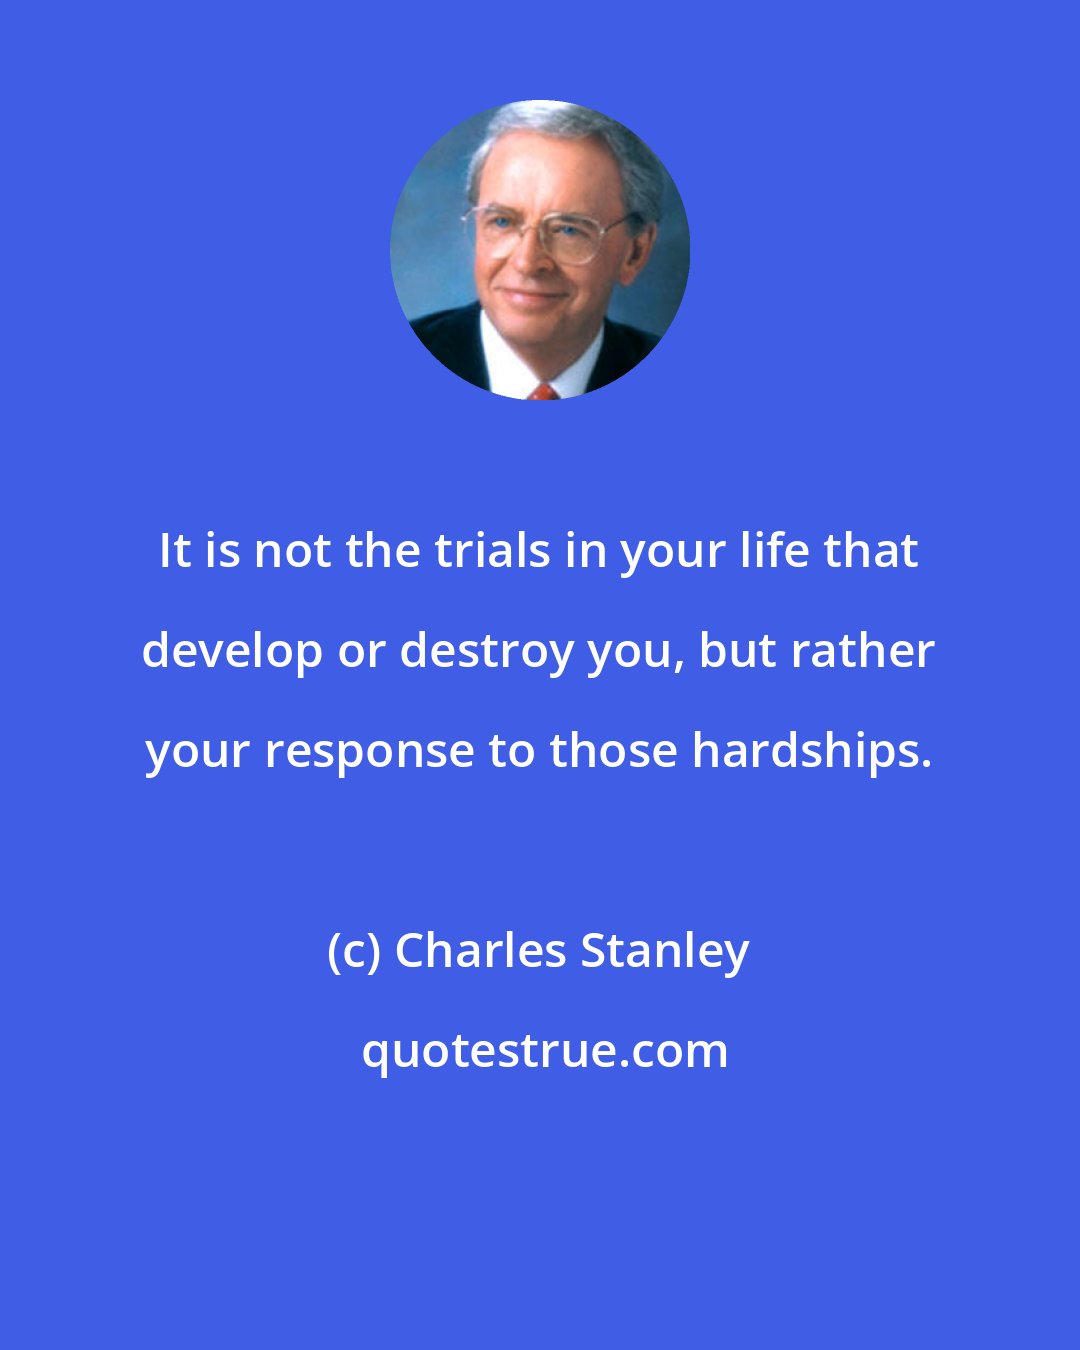 Charles Stanley: It is not the trials in your life that develop or destroy you, but rather your response to those hardships.